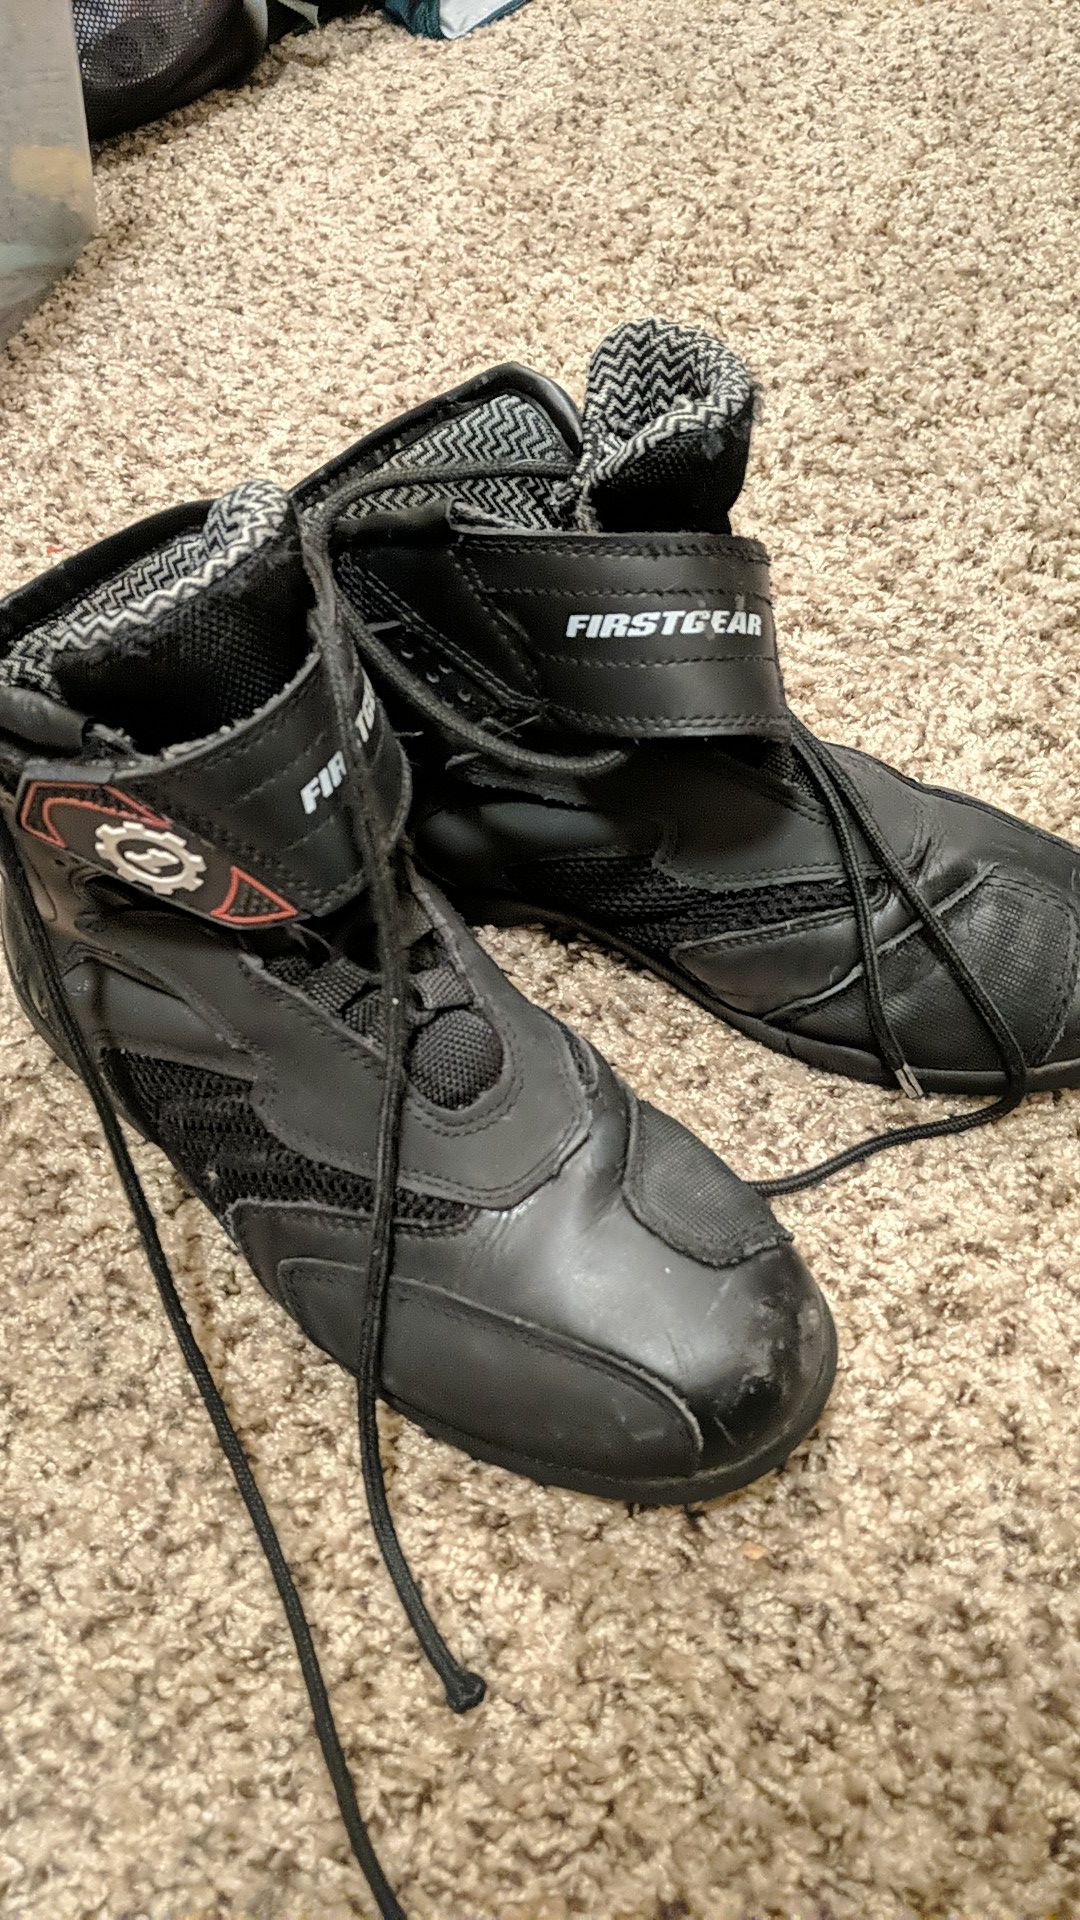 First Gear Motorcycle Boots